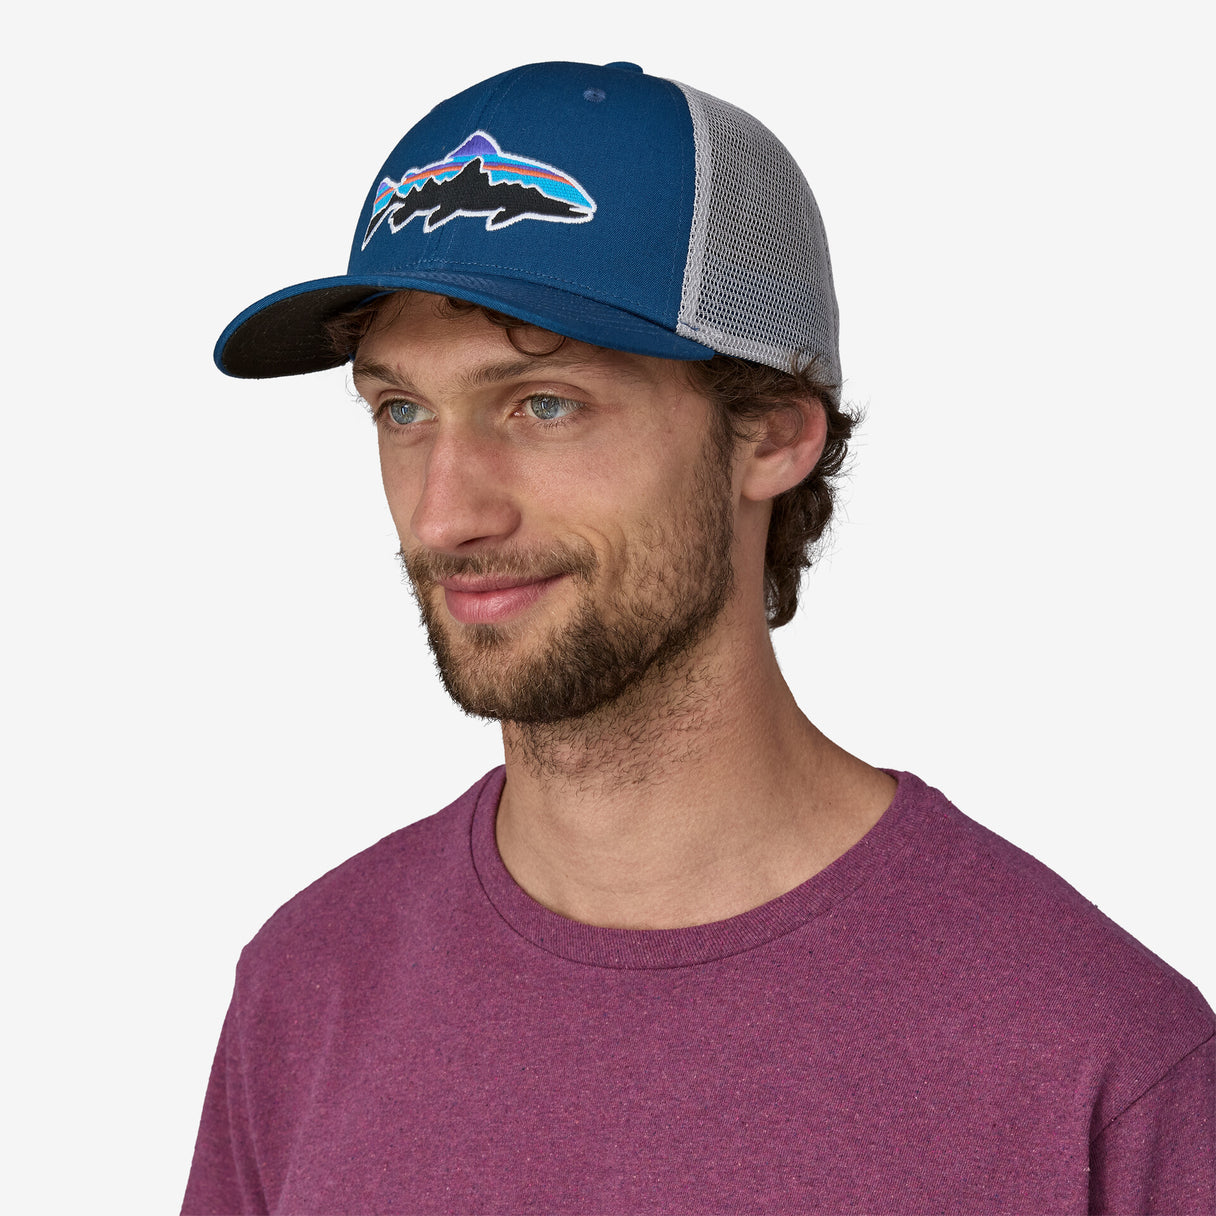 Patagonia Fitz Roy Trout Trucker Hat - Cliffs and Waves/Natural